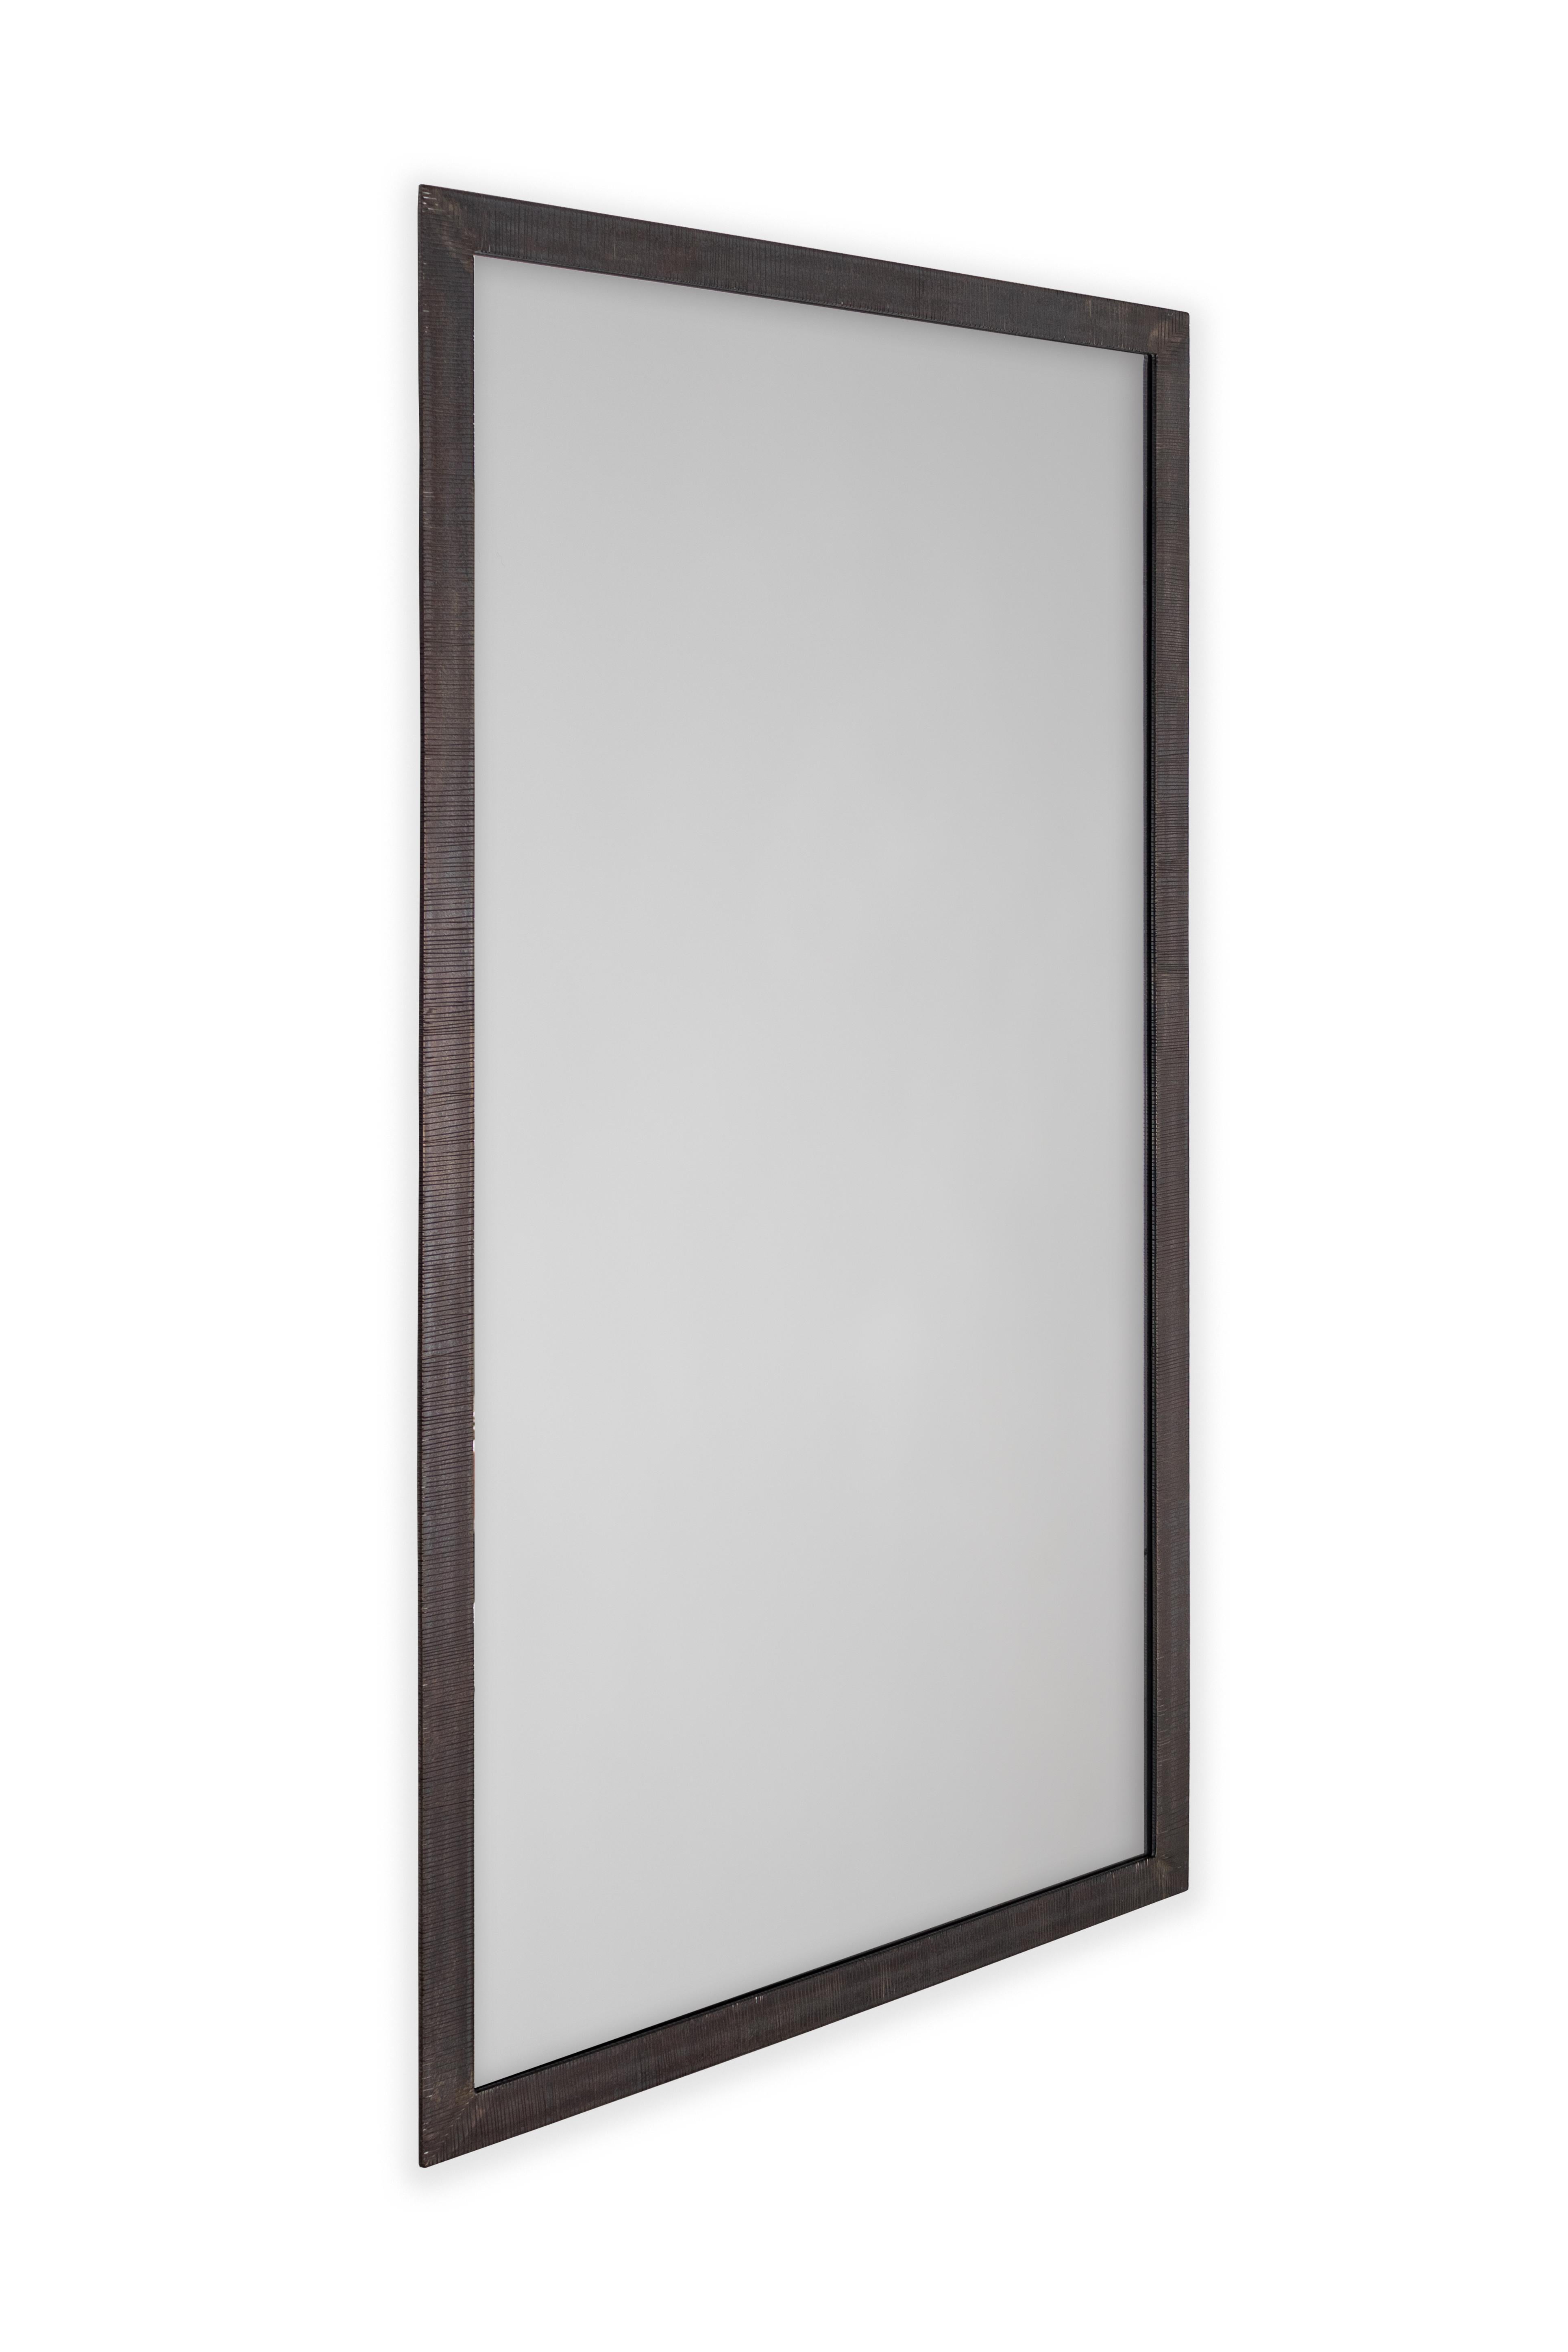 Rustic Strei Effect Hand Wrought Steel Mirror Frame For Sale